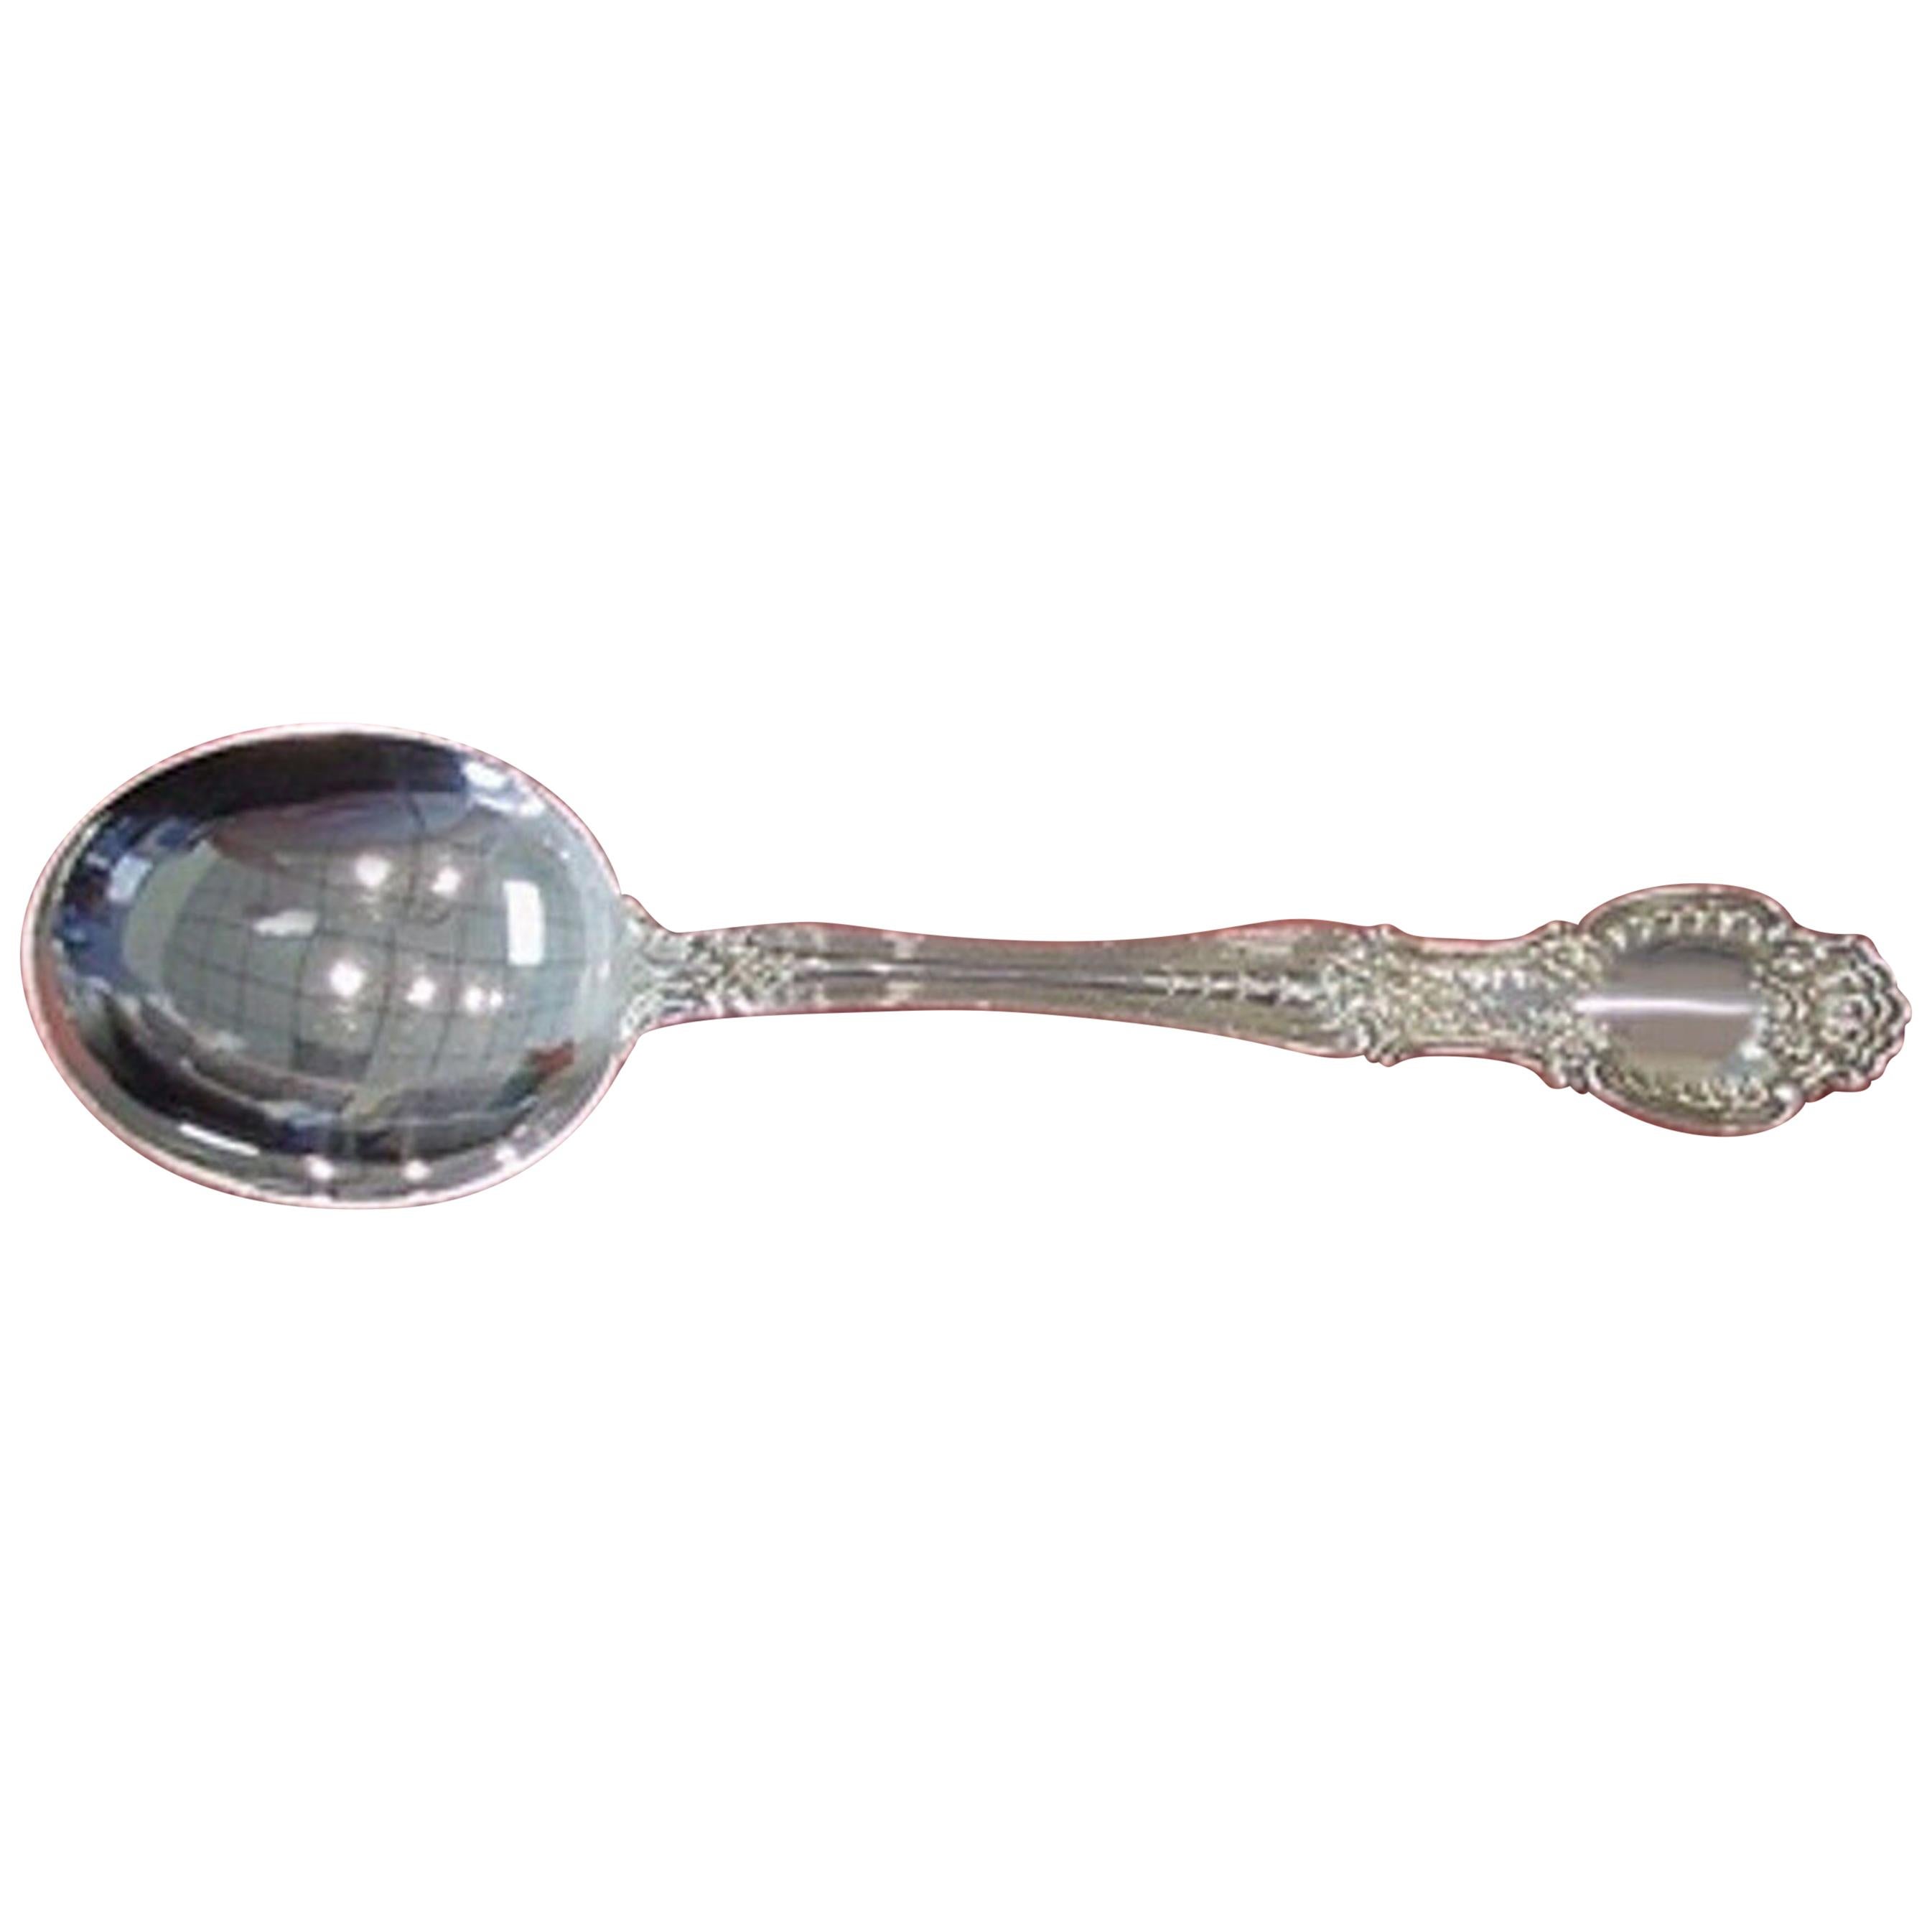 Richelieu by Tiffany and Co Sterling Silver Cream Soup Spoon 6 3/4"